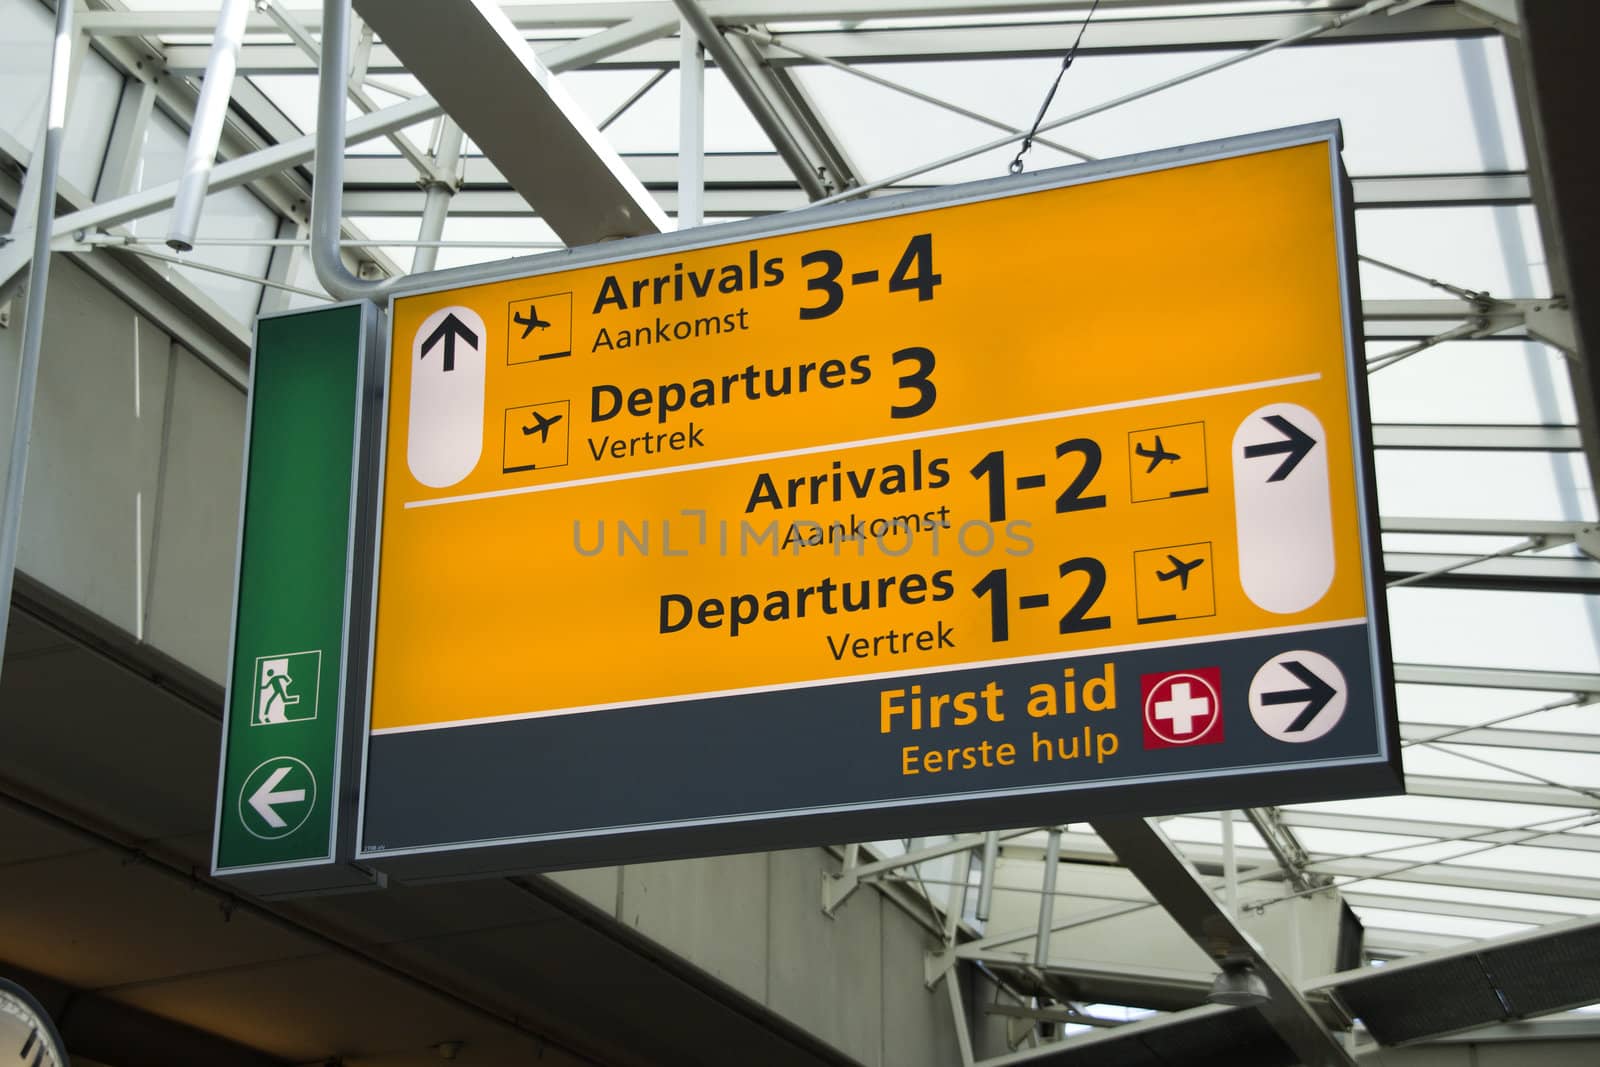 Arrival and departure information at Schiphol airport in Amsterdam